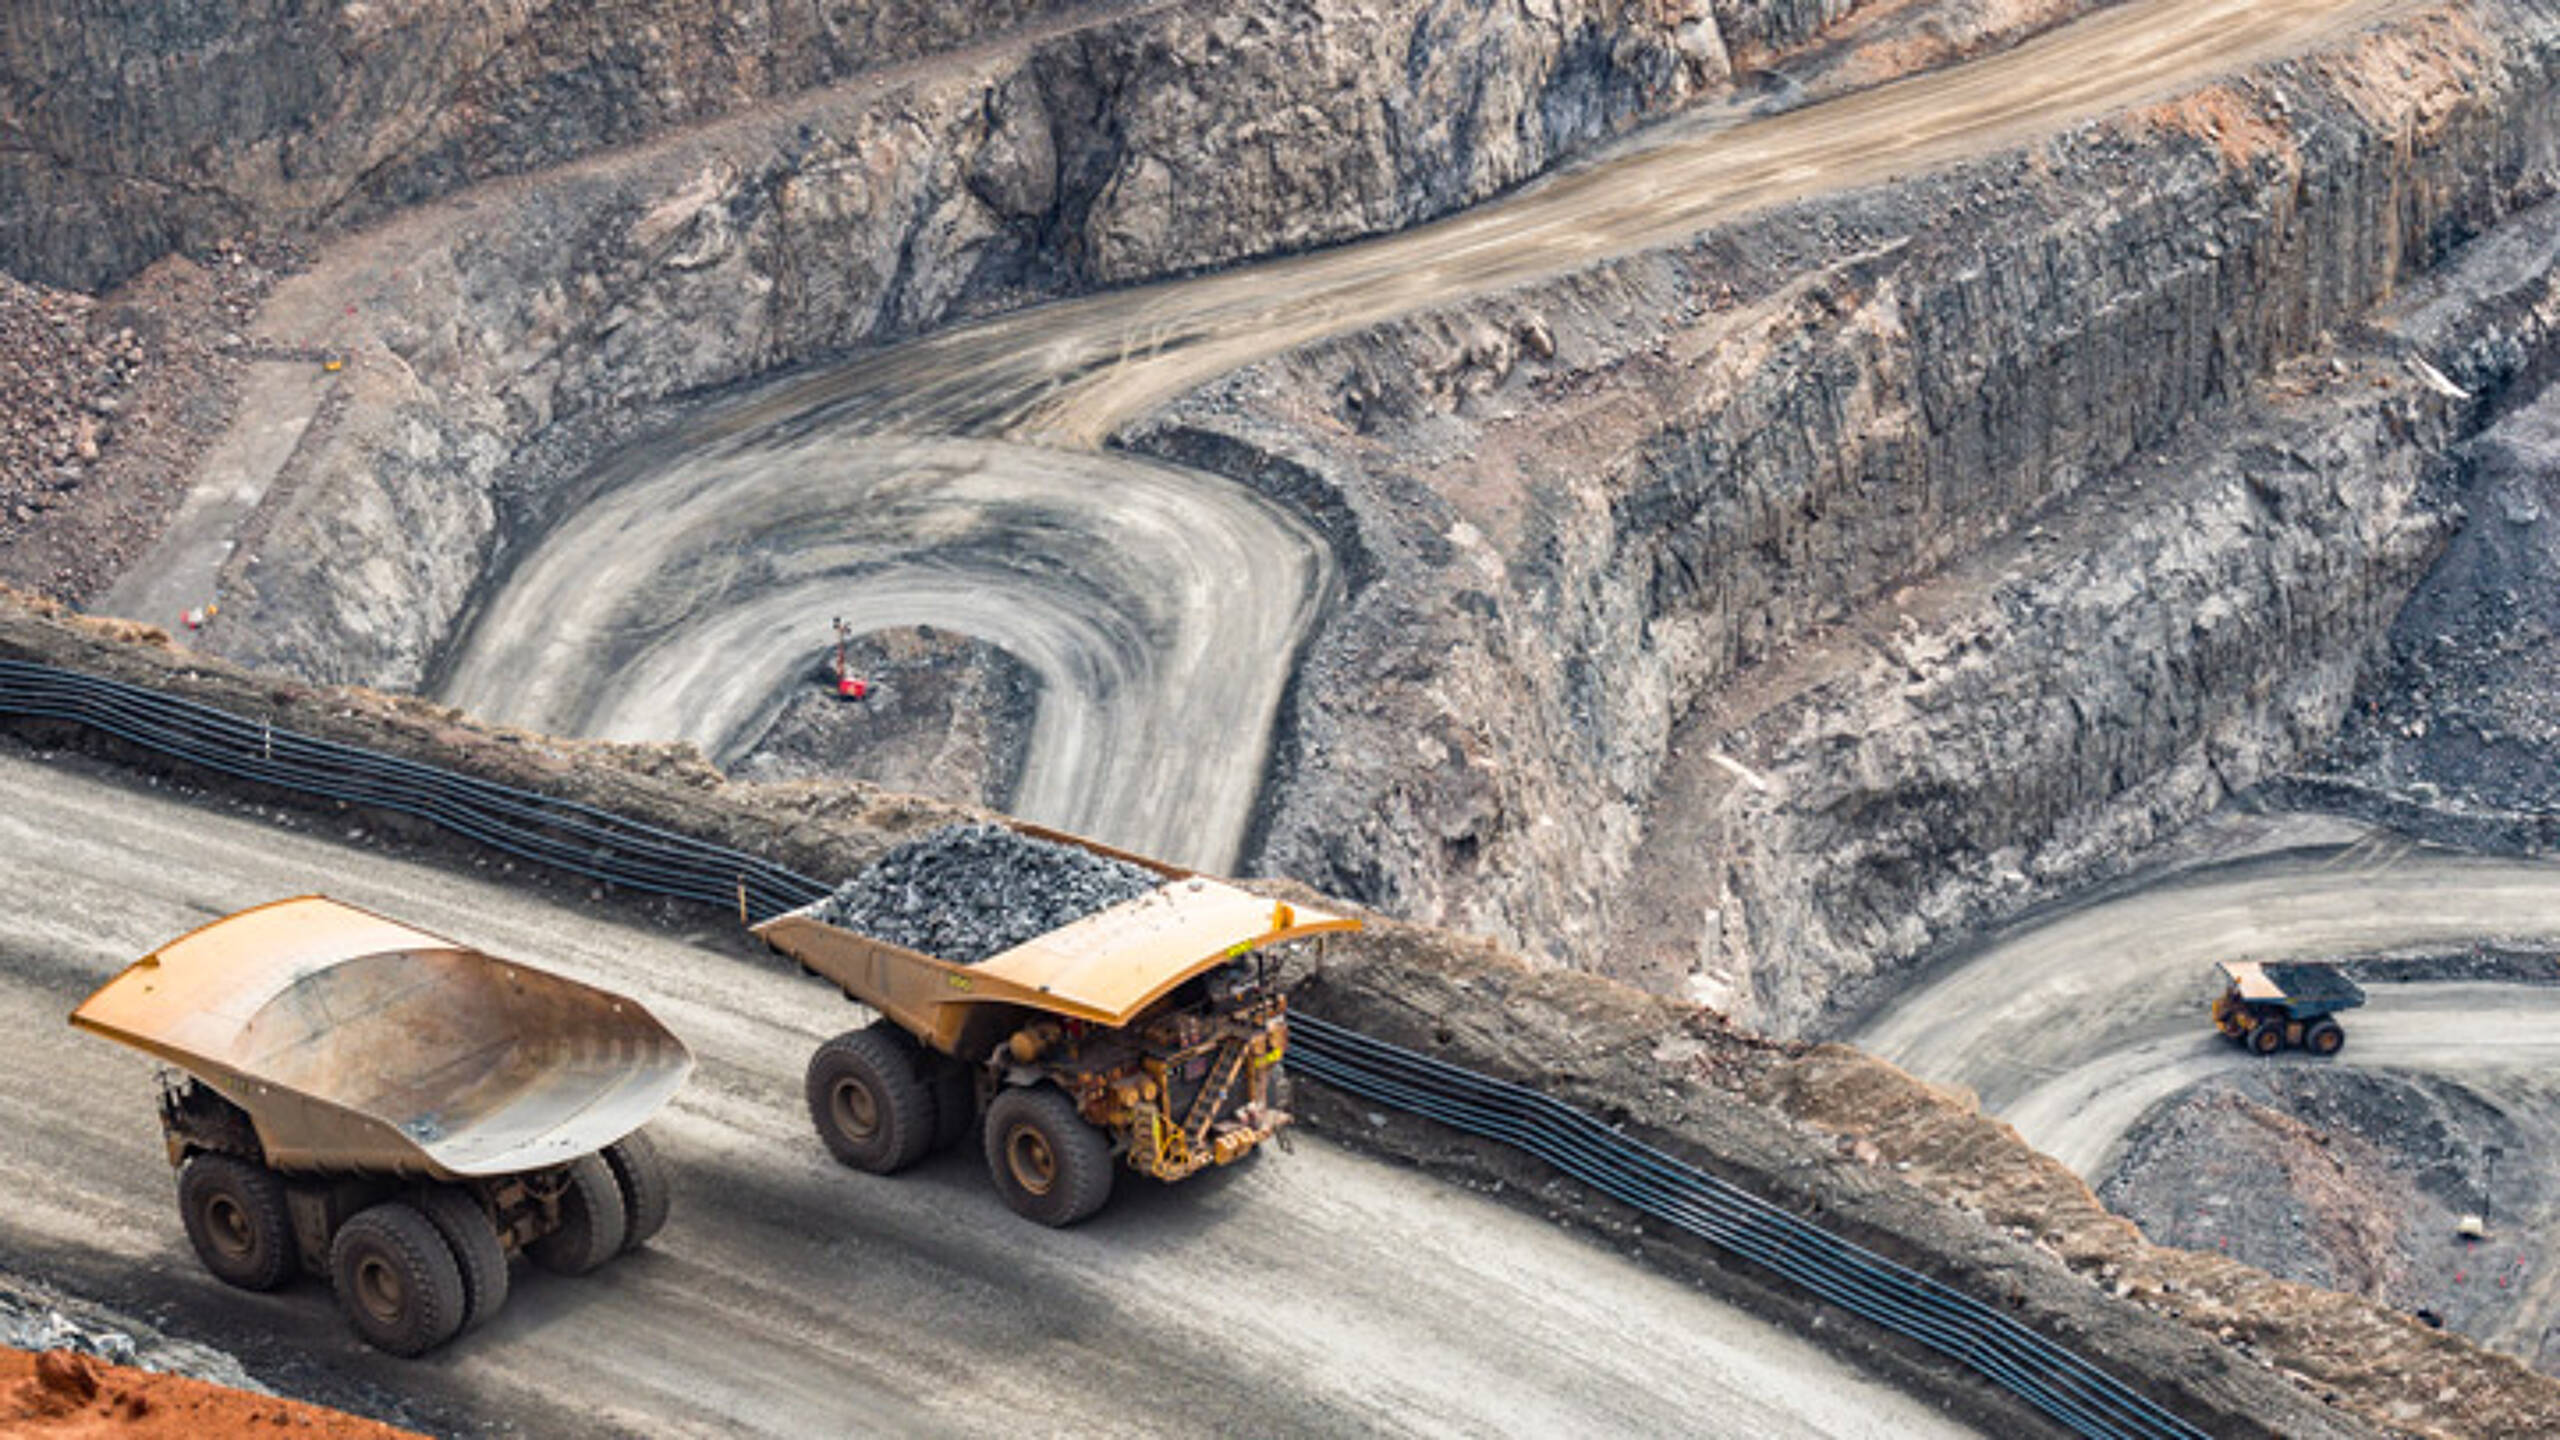 Global investors with $11trn in assets rally behind Mining 2030 Commission